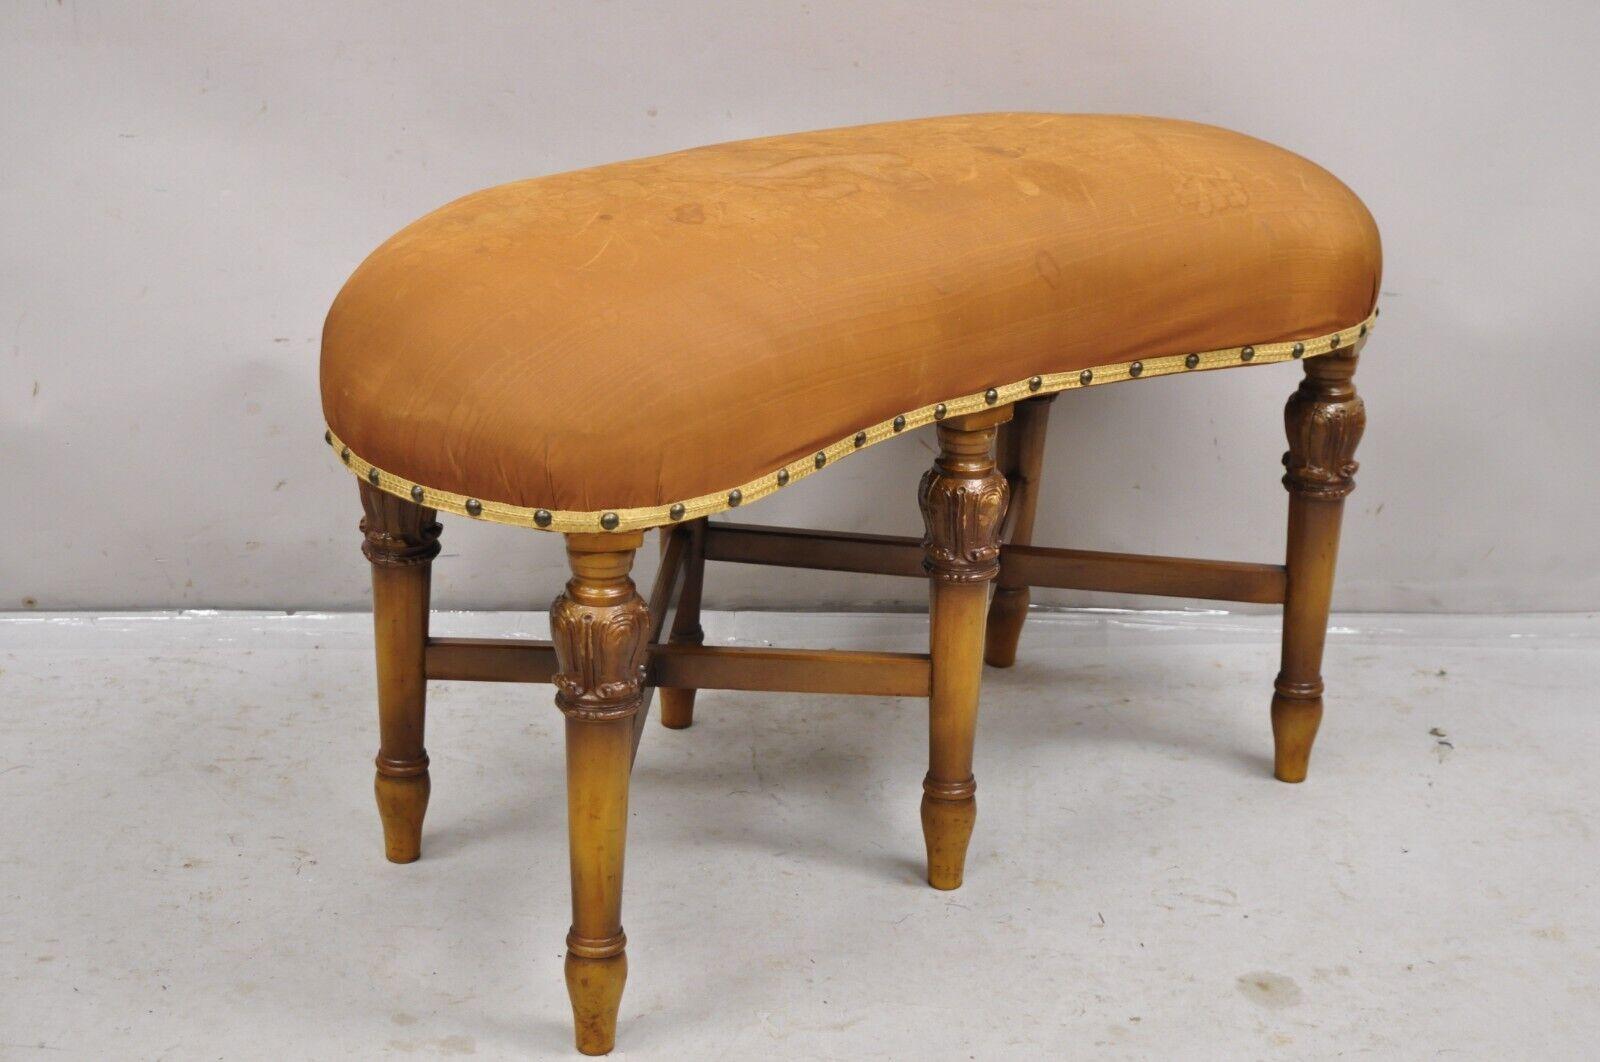 Antique Joerns Bros Kidney Bean 6 Leg French Provincial Vanity Bench Seat. Item features a carved stretcher base, brown painted finish, tapered legs, upholstered seat, very nice vintage item. Circa Early 20th Century. Measurements: 20